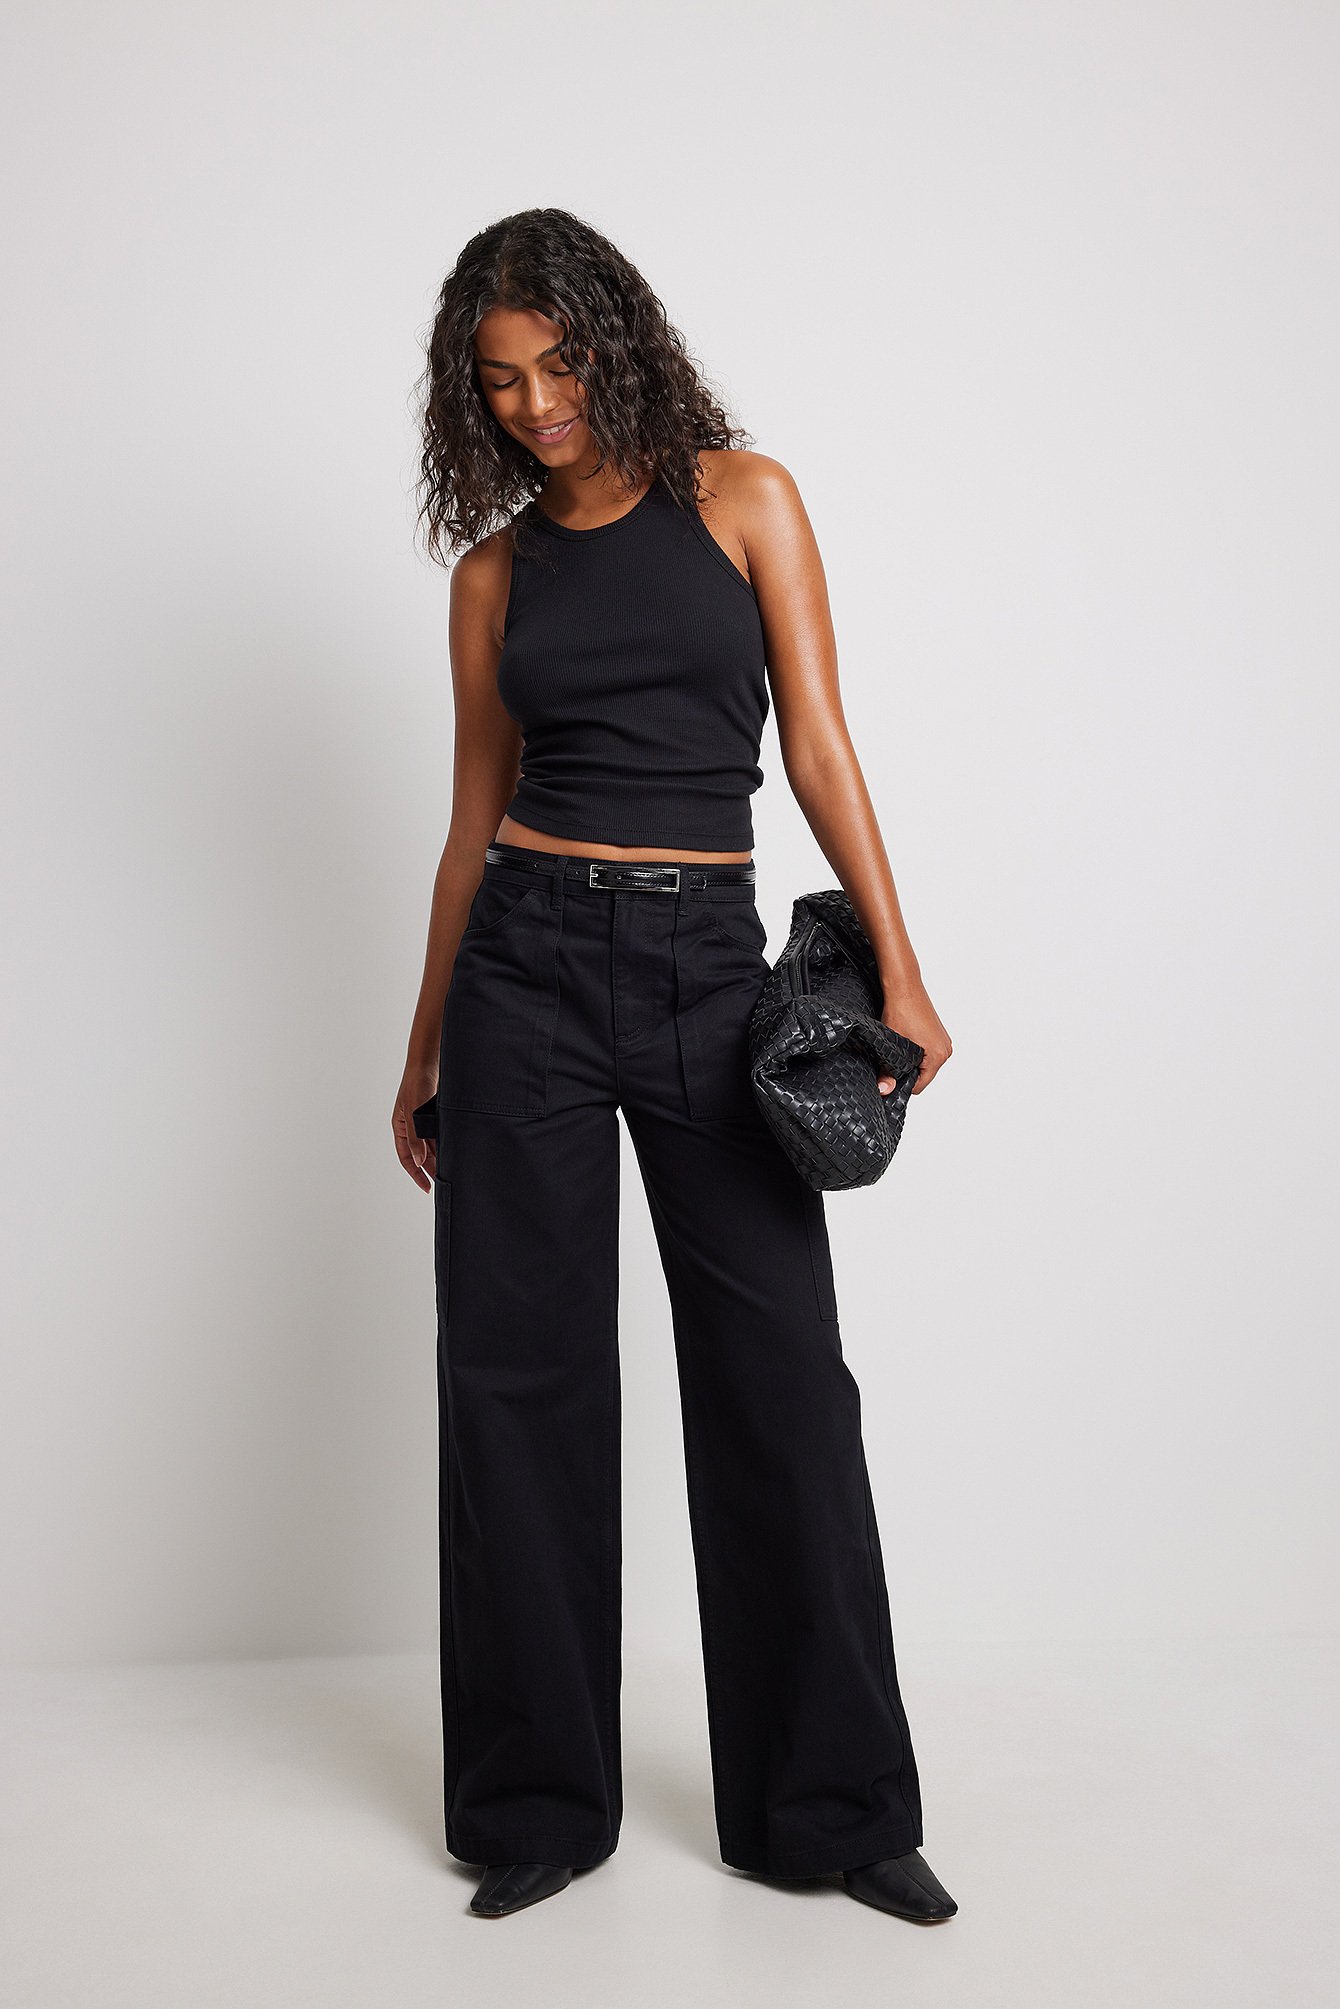 Low Waist Cargo Pants Outfit